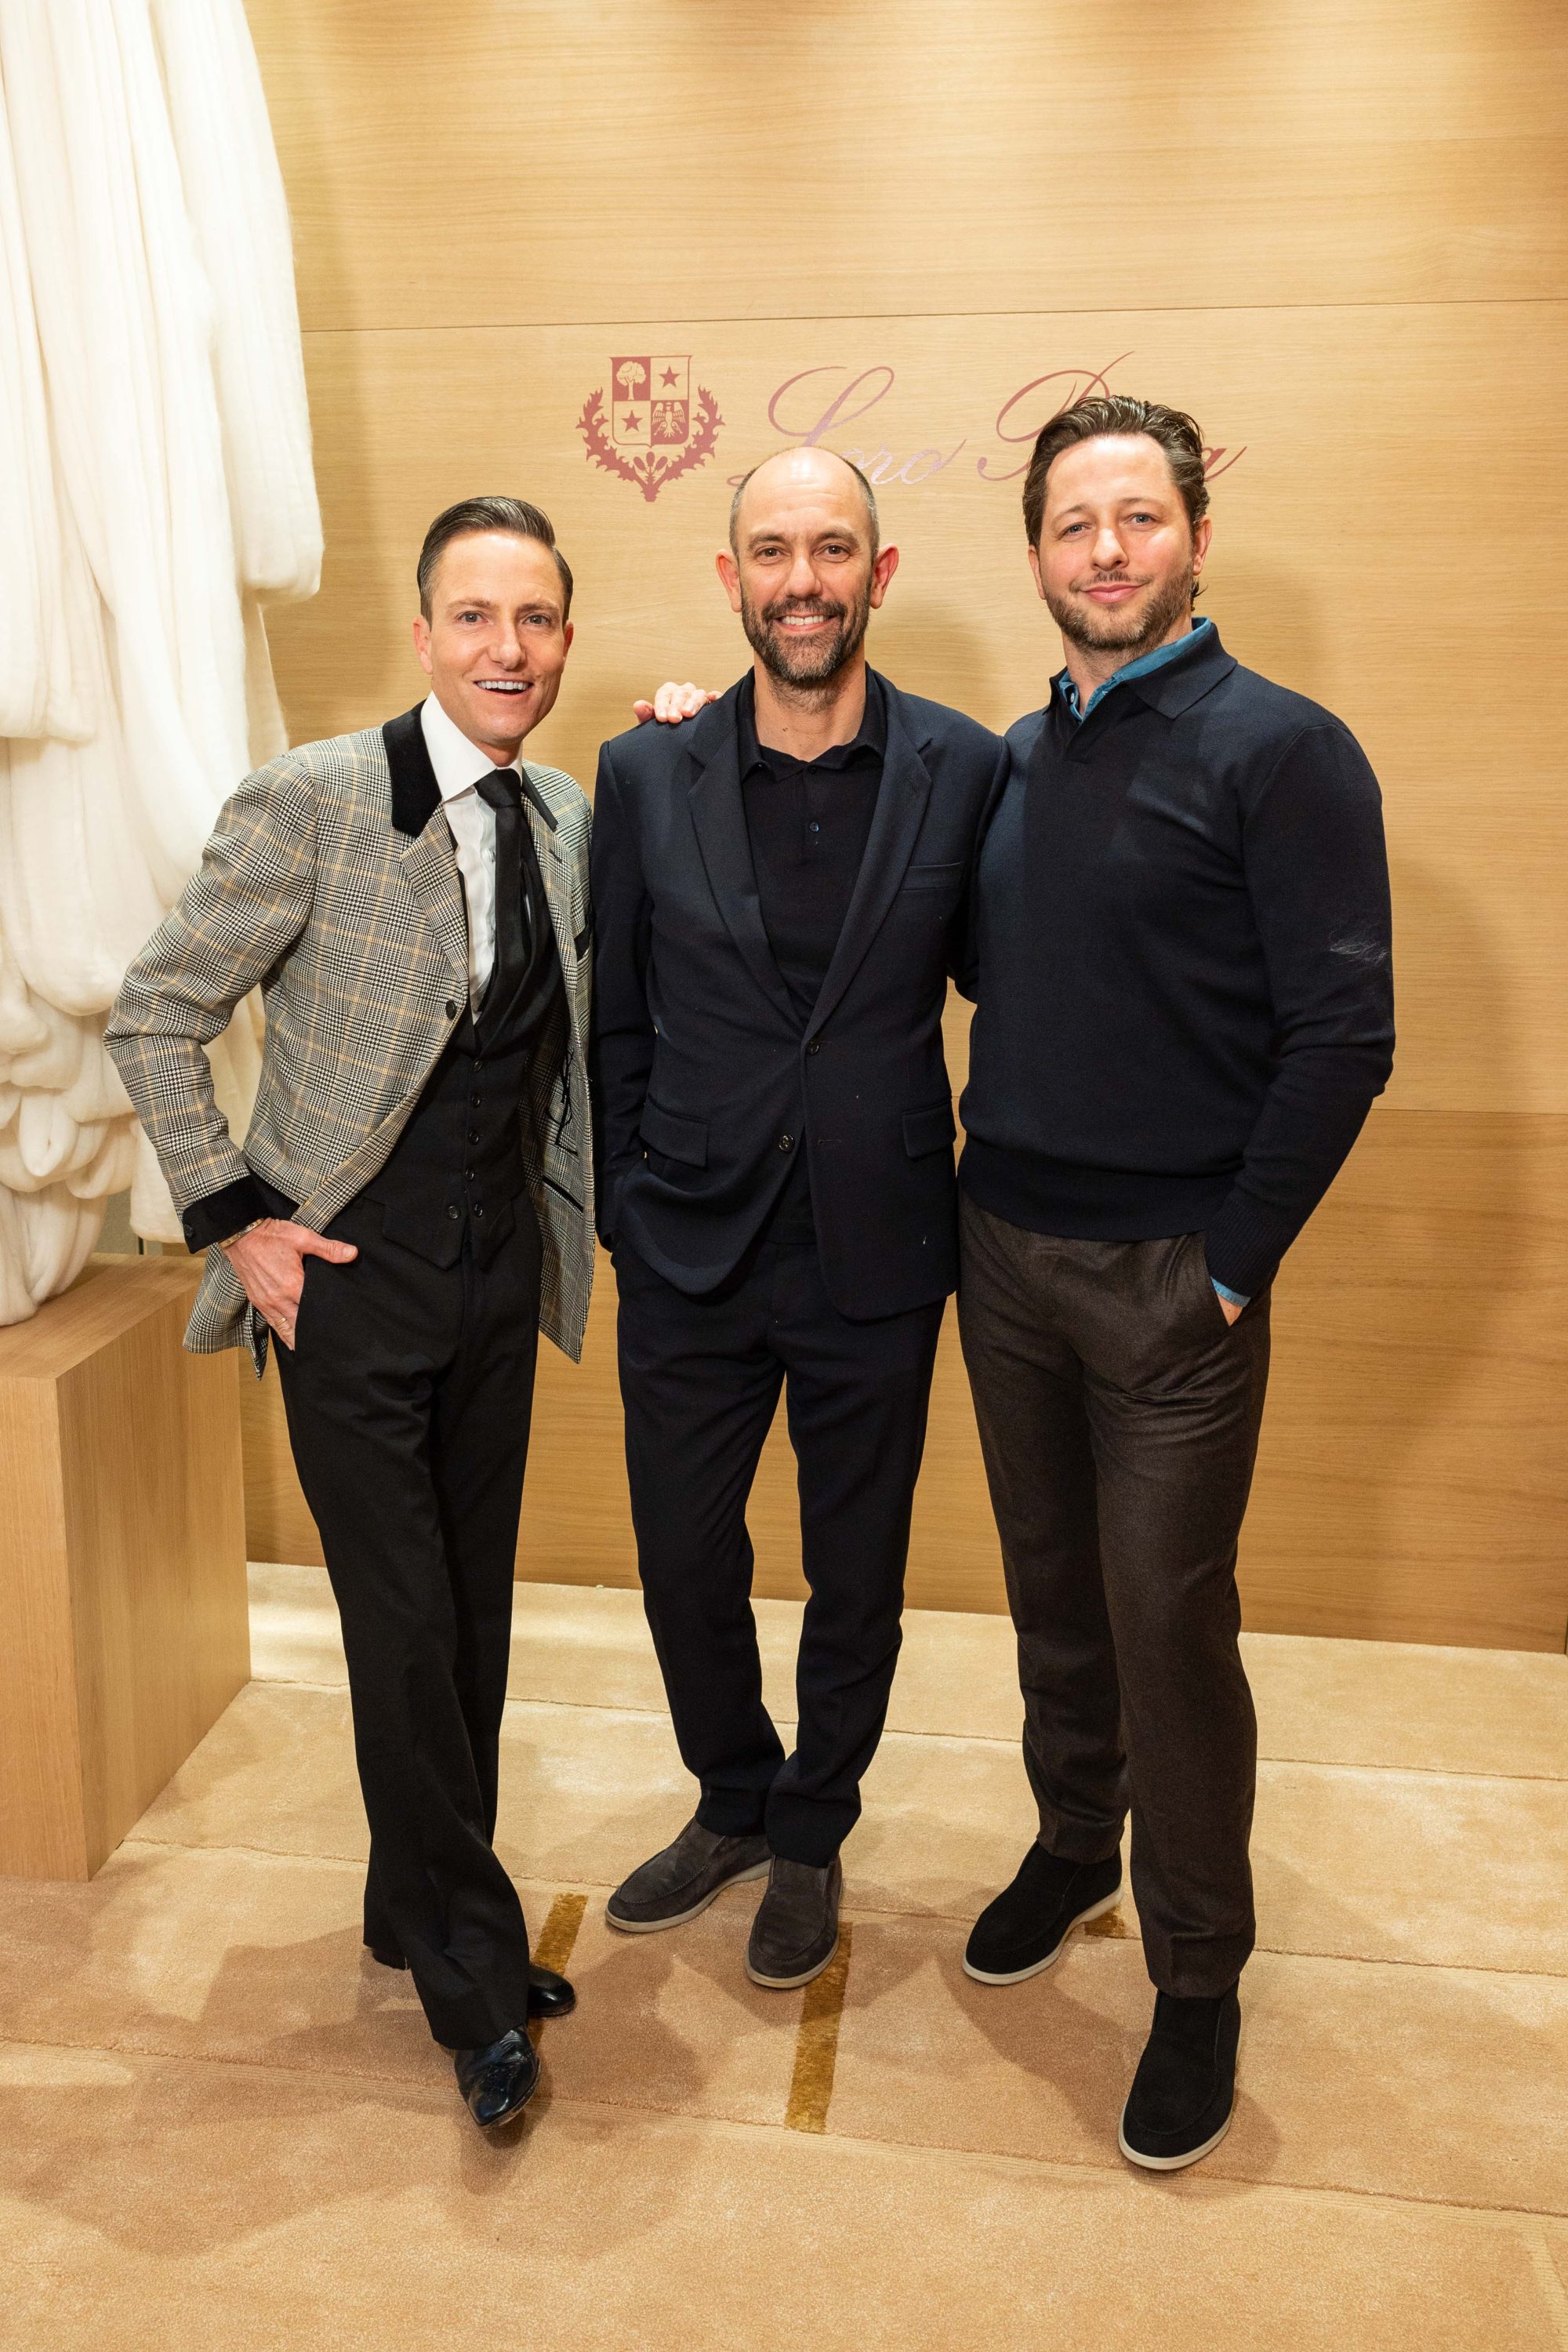 Loro Piana's Damien Bertrand on starting a new chapter for the